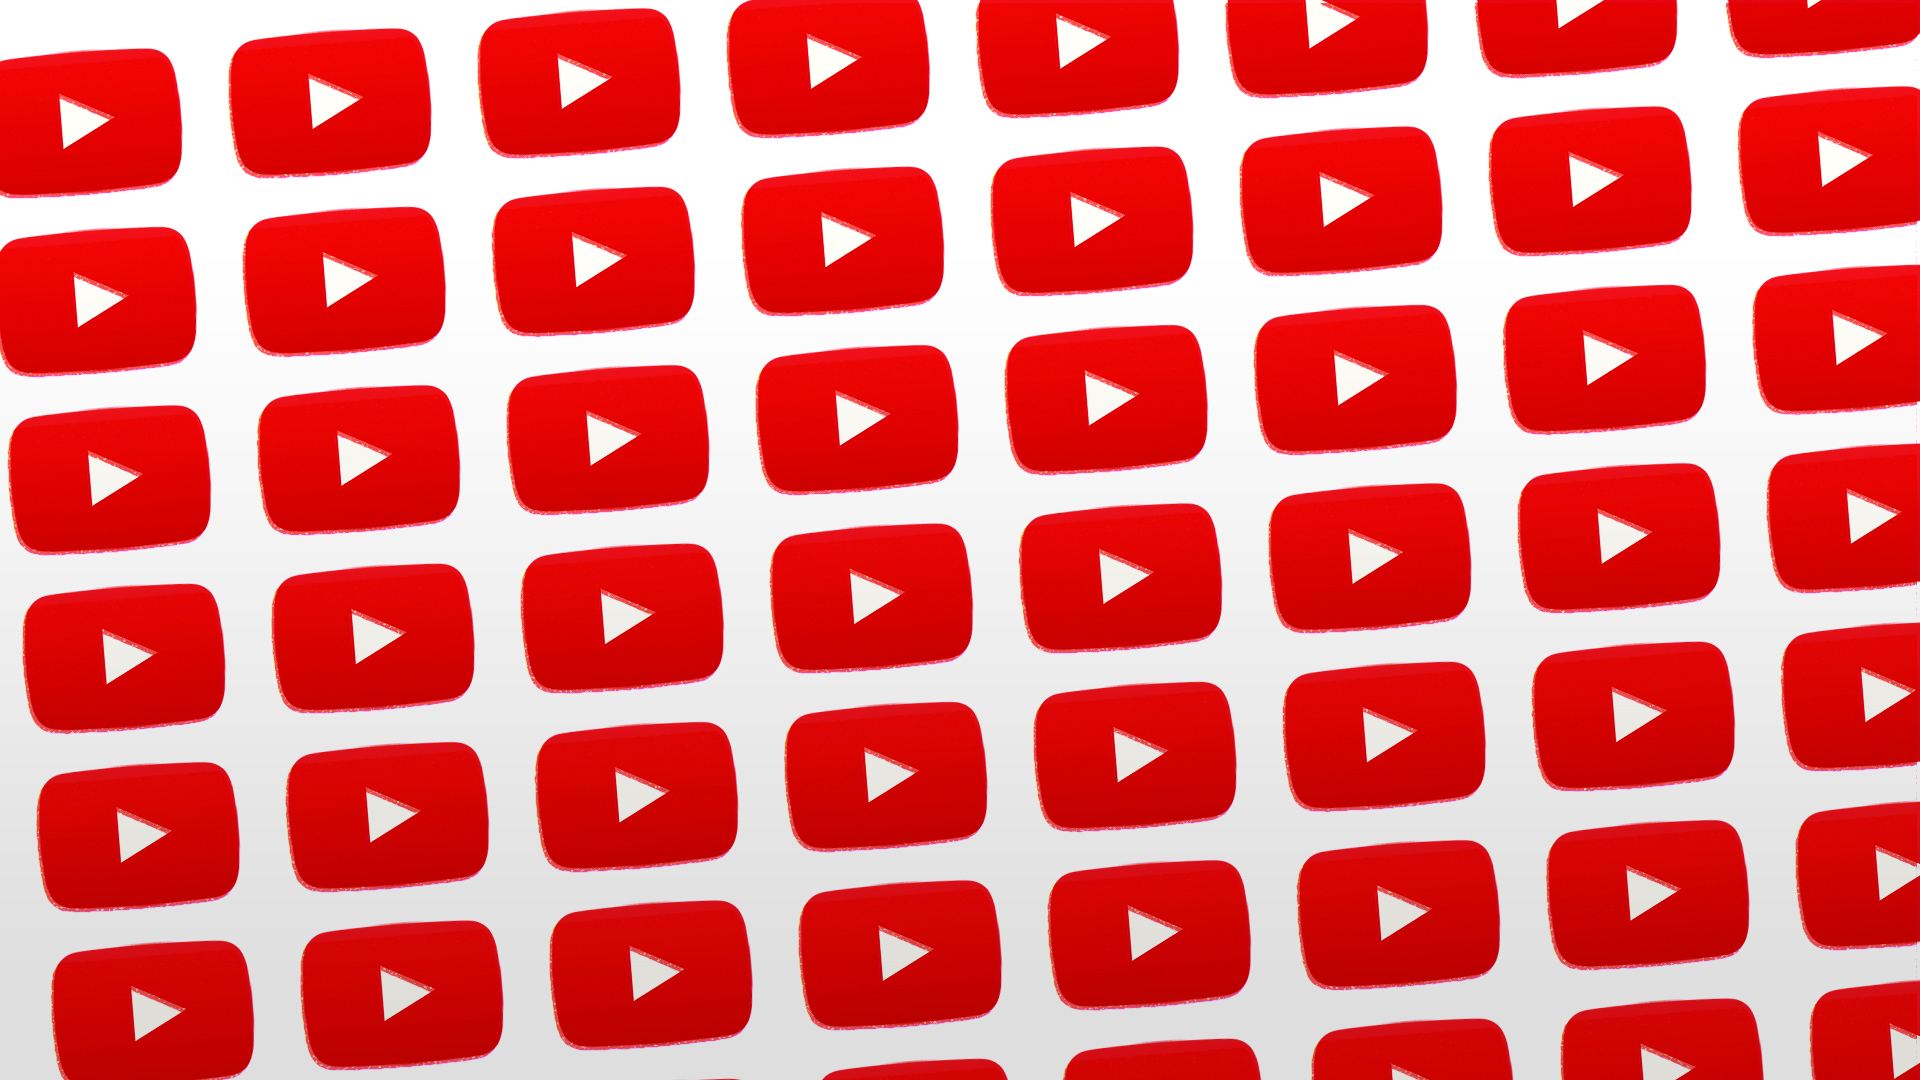 Youtube Backgrounds Free Download 